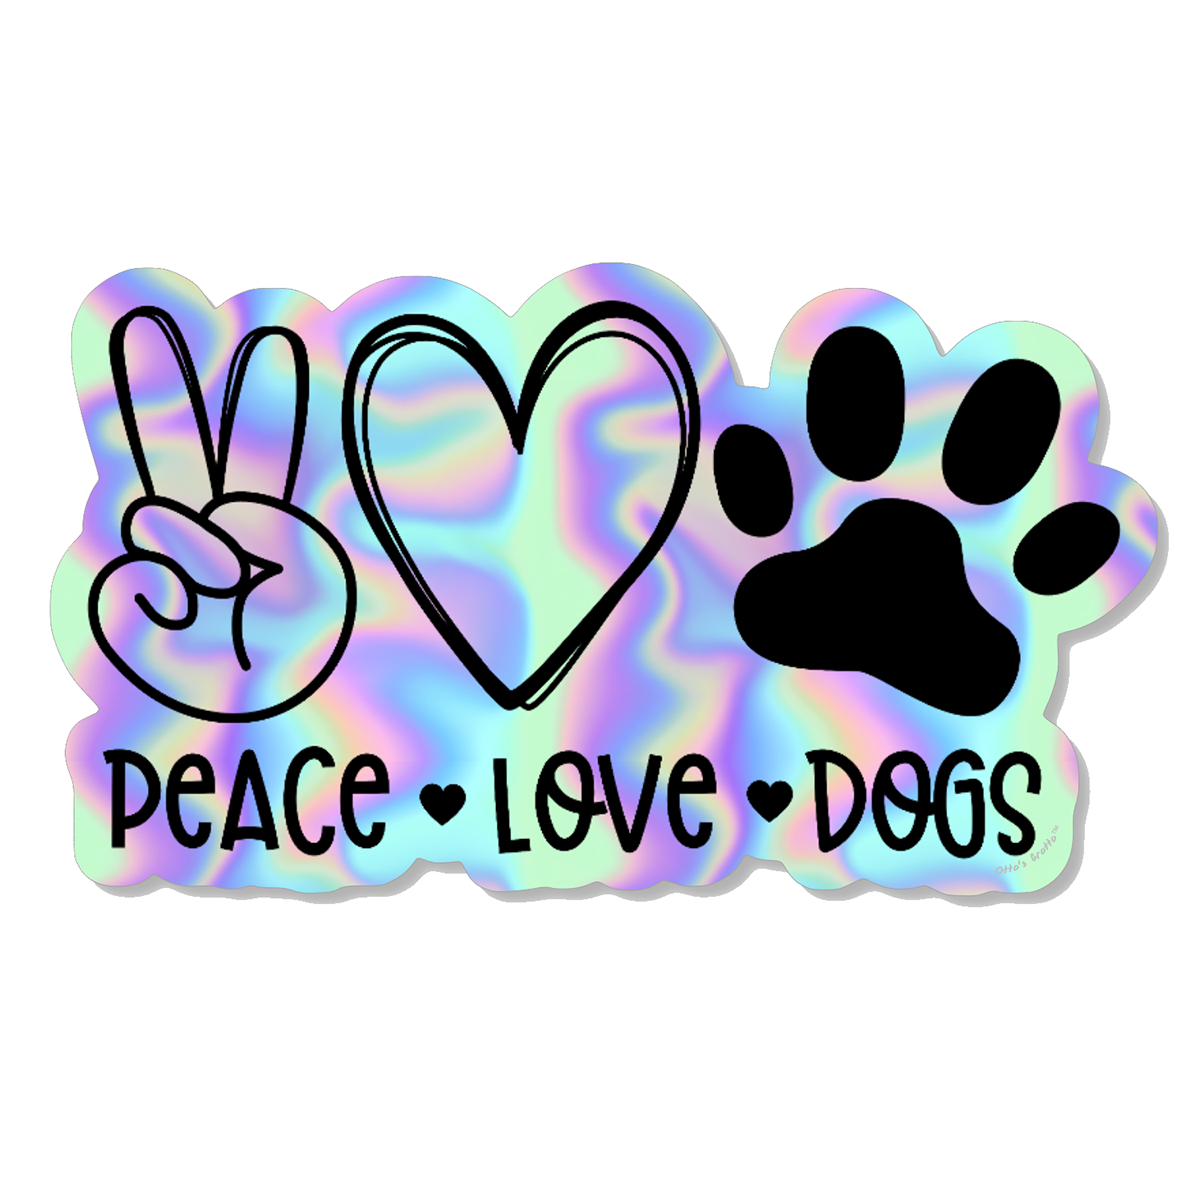 Peace Love Dogs Sticker Hologram Dog Decal for Car, Hydroflask, Pretty Dog Gift for Dog Mom, Dog Car Sticker, Dog Water Bottle Sticker